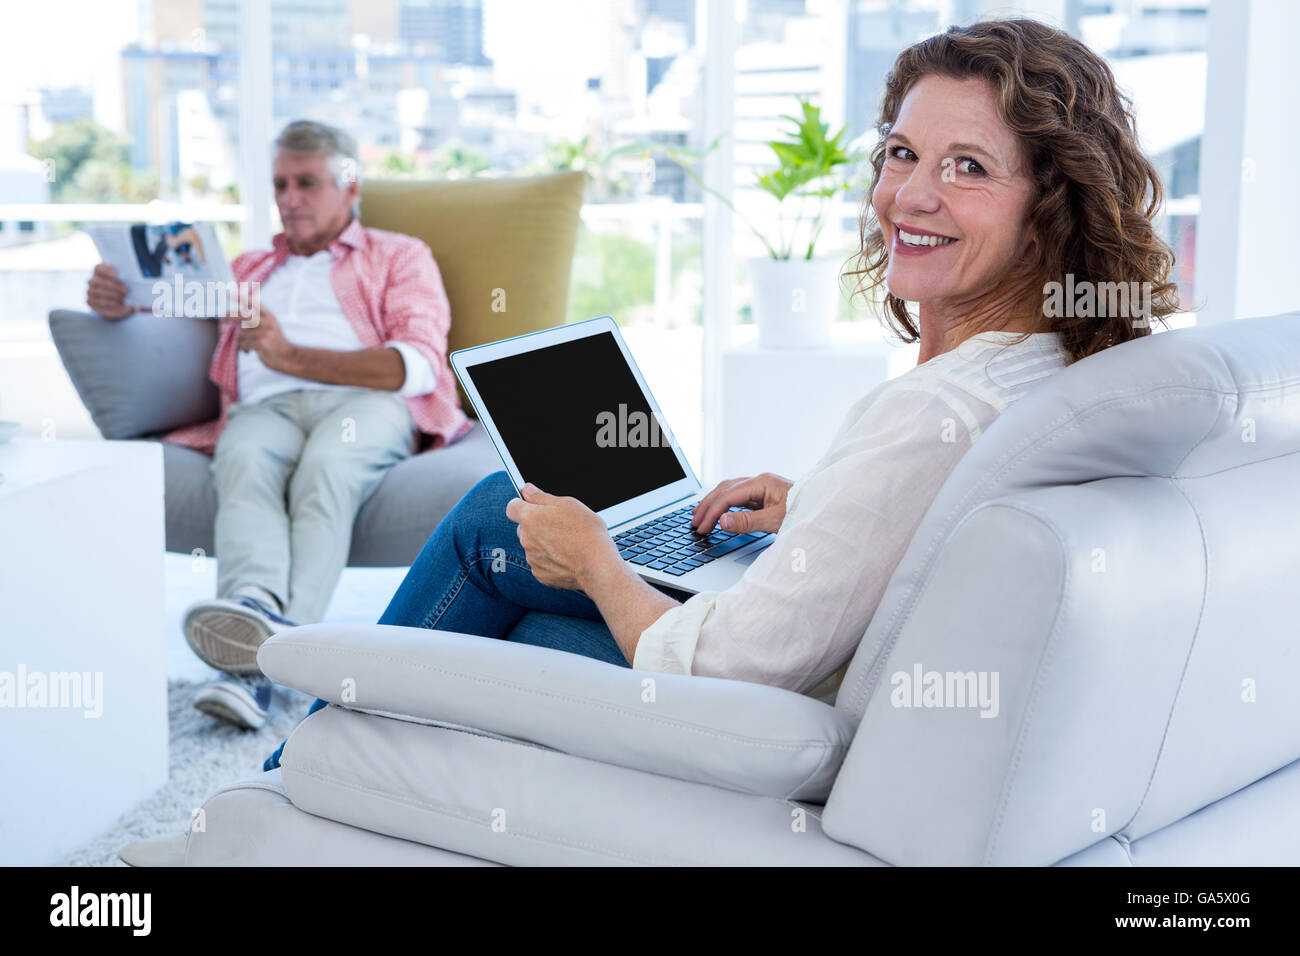 Smiling woman with laptop while mature man reading newspaper Stock Photo